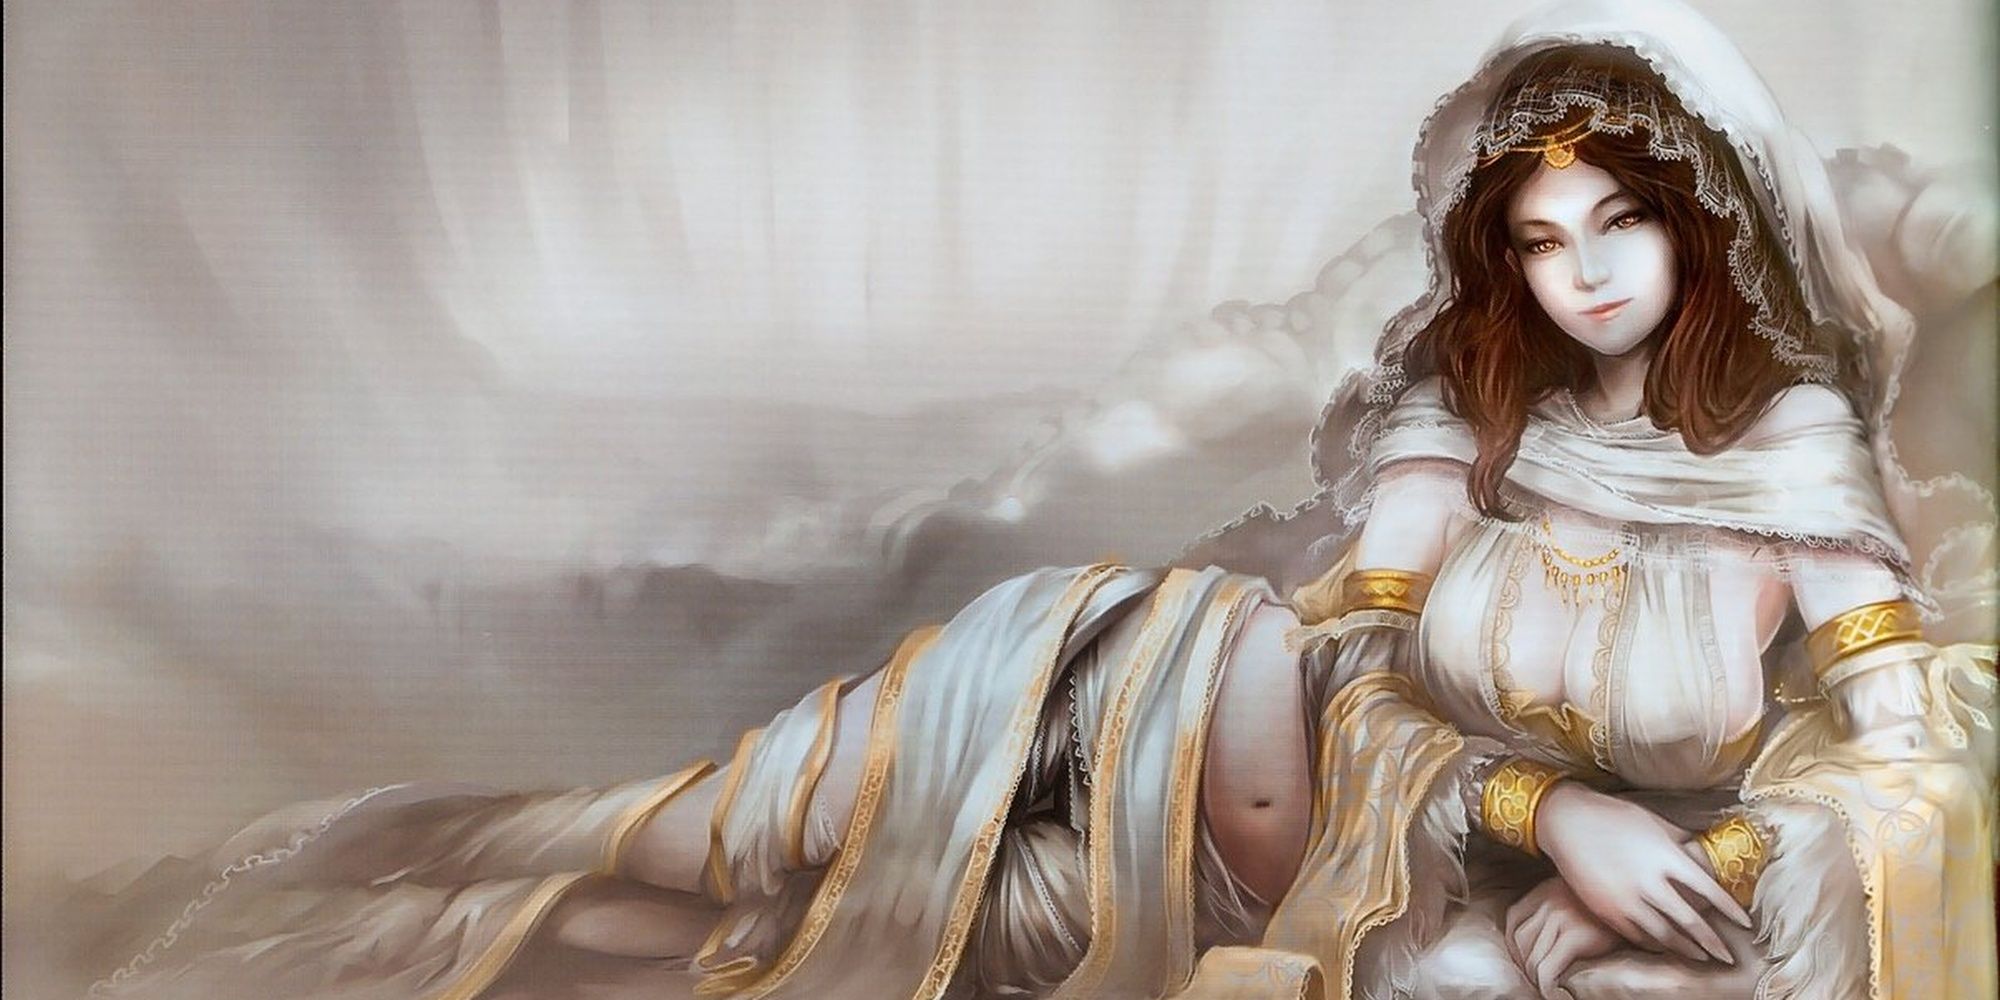 Gwynevere Princess of Sunlight from Dark Souls Cropped